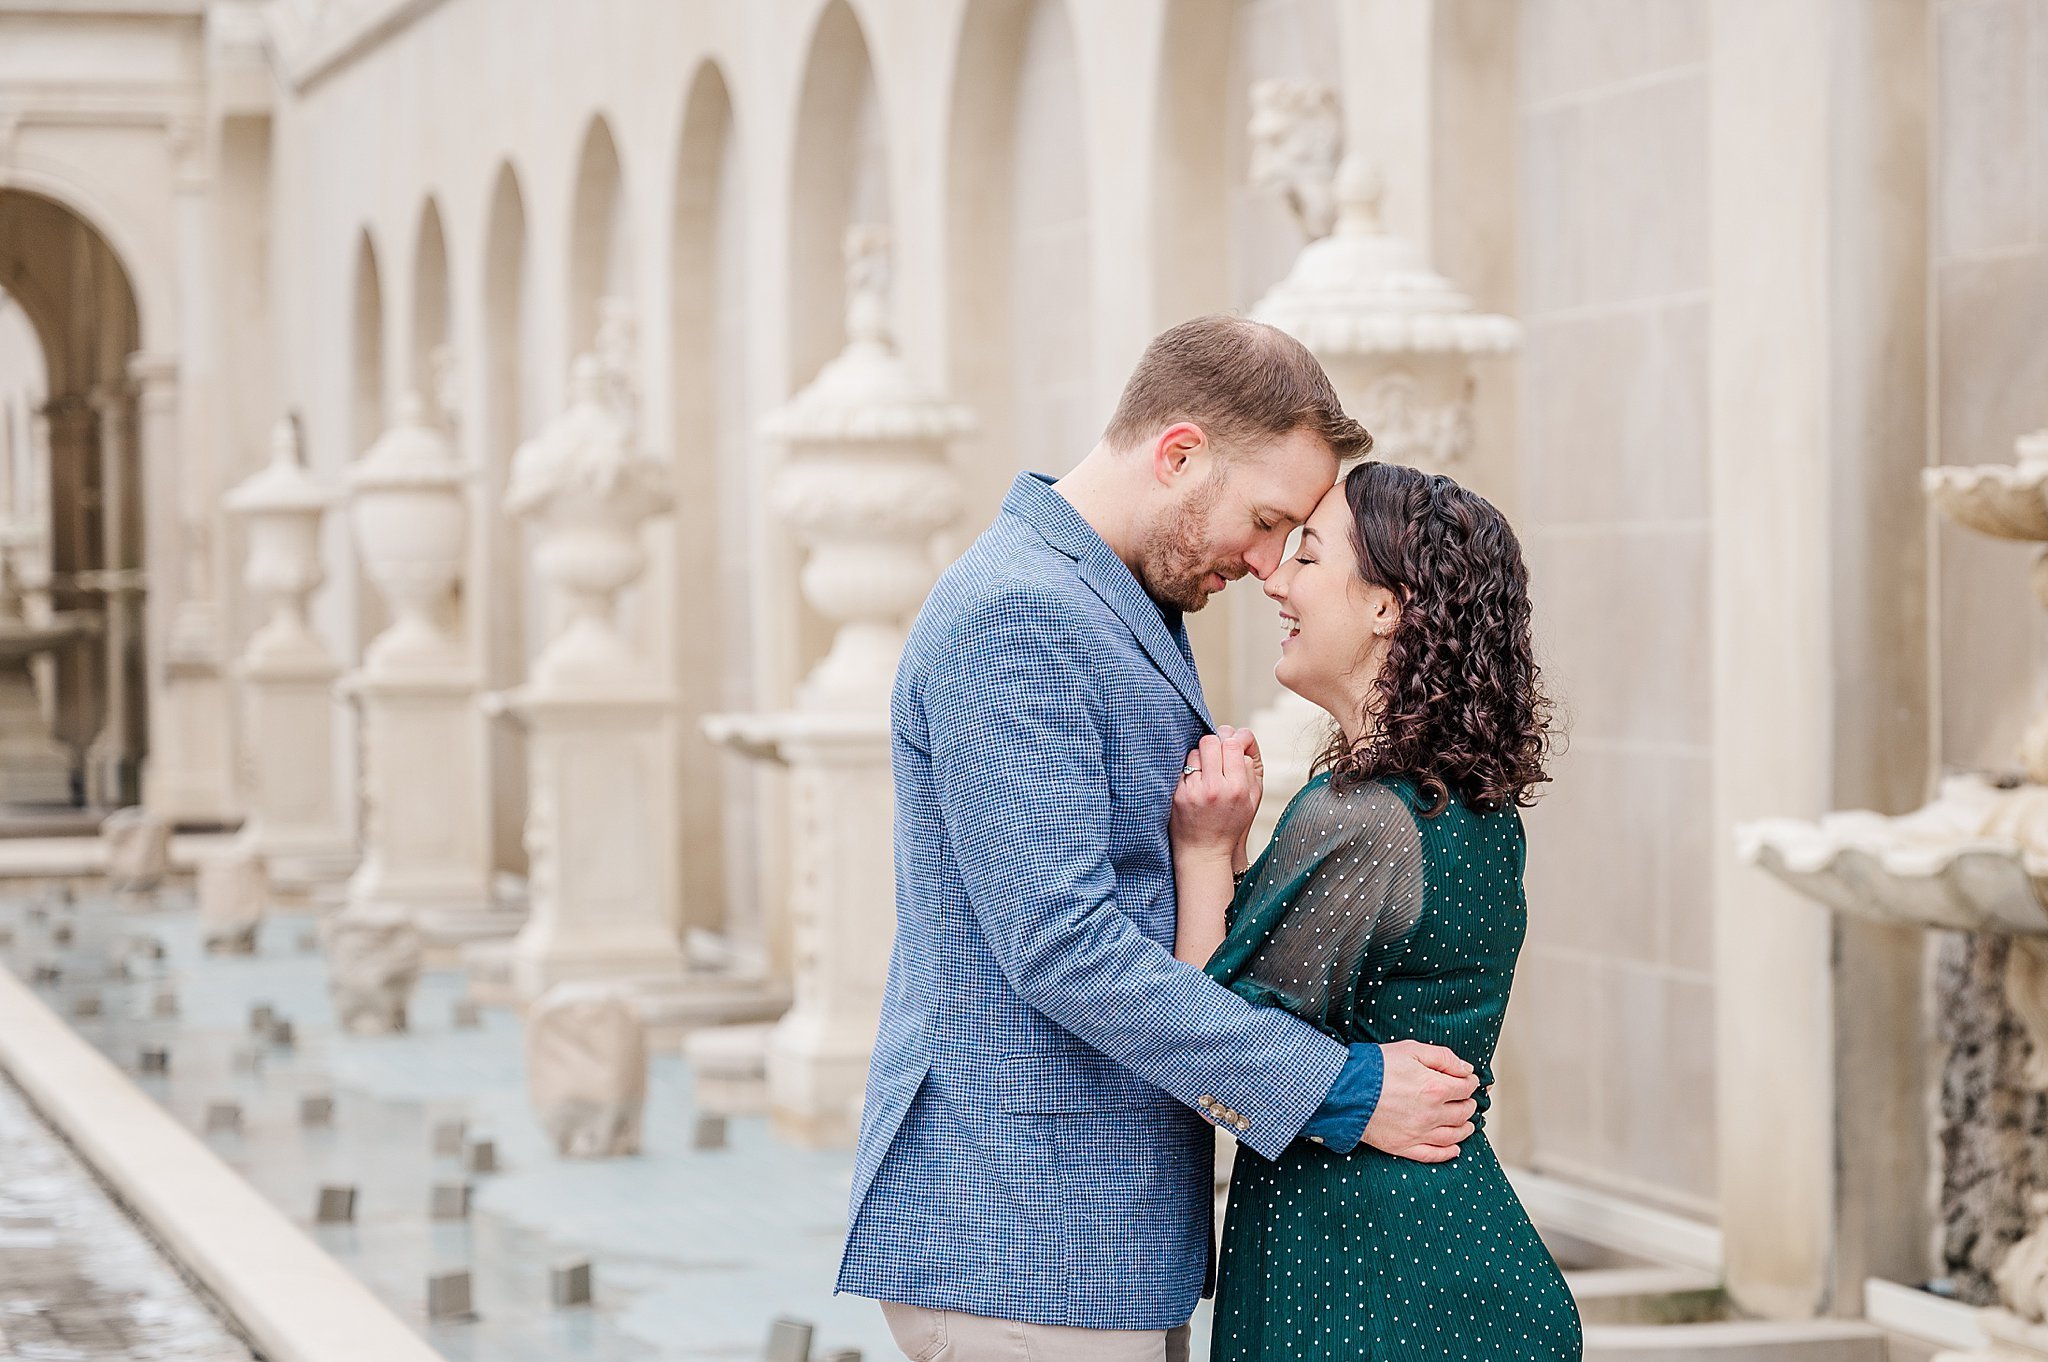 Longwood Gardens Winter Engagement Session Photography Session_4162.jpg